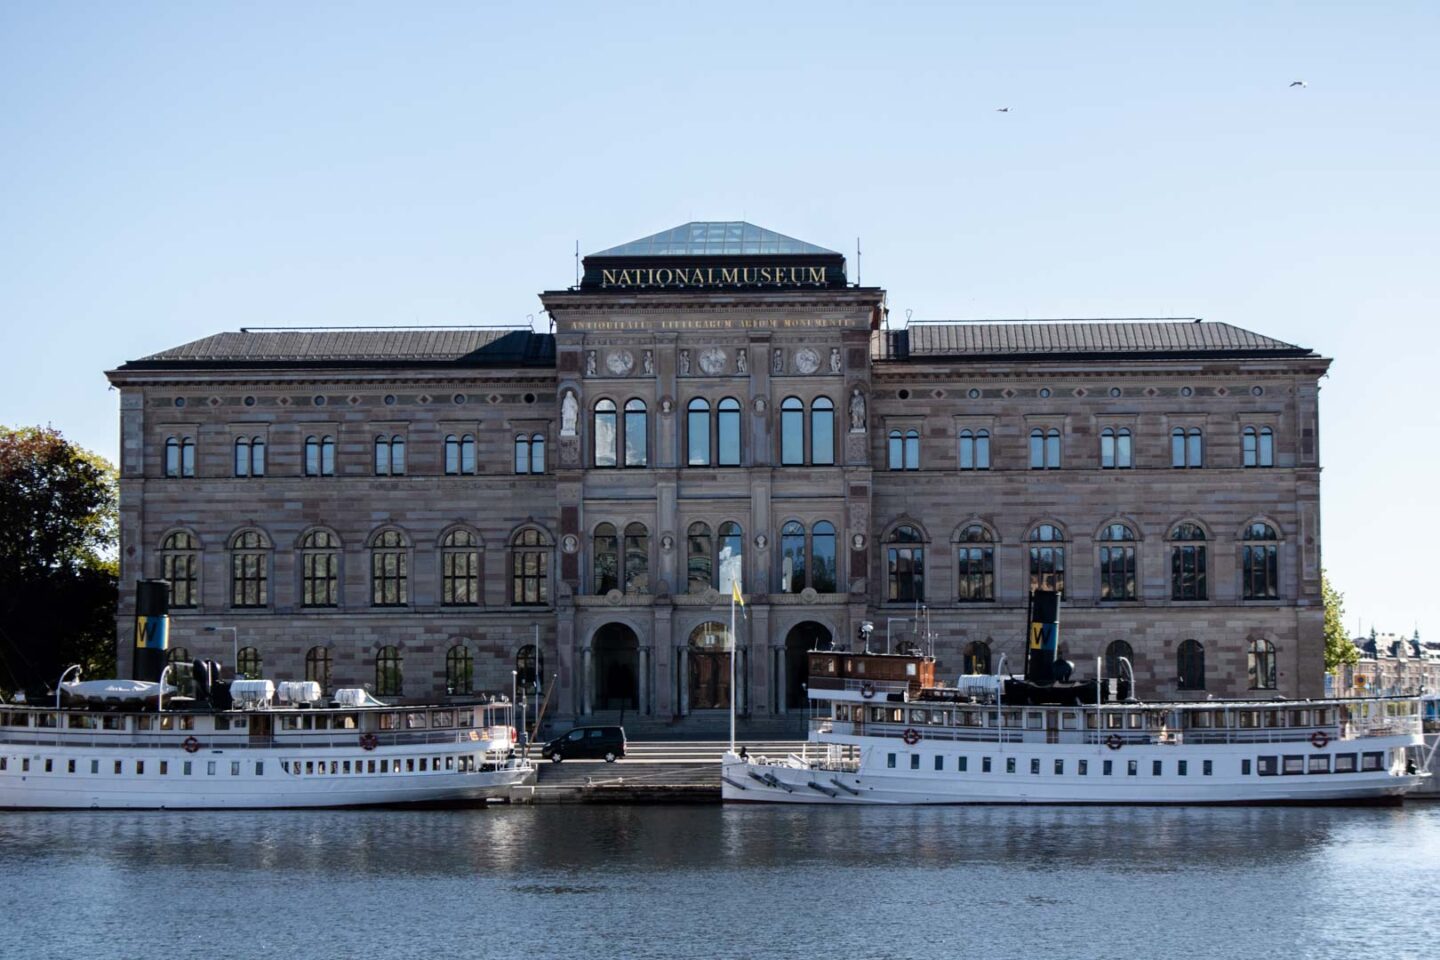 the National Museum of Stockholm